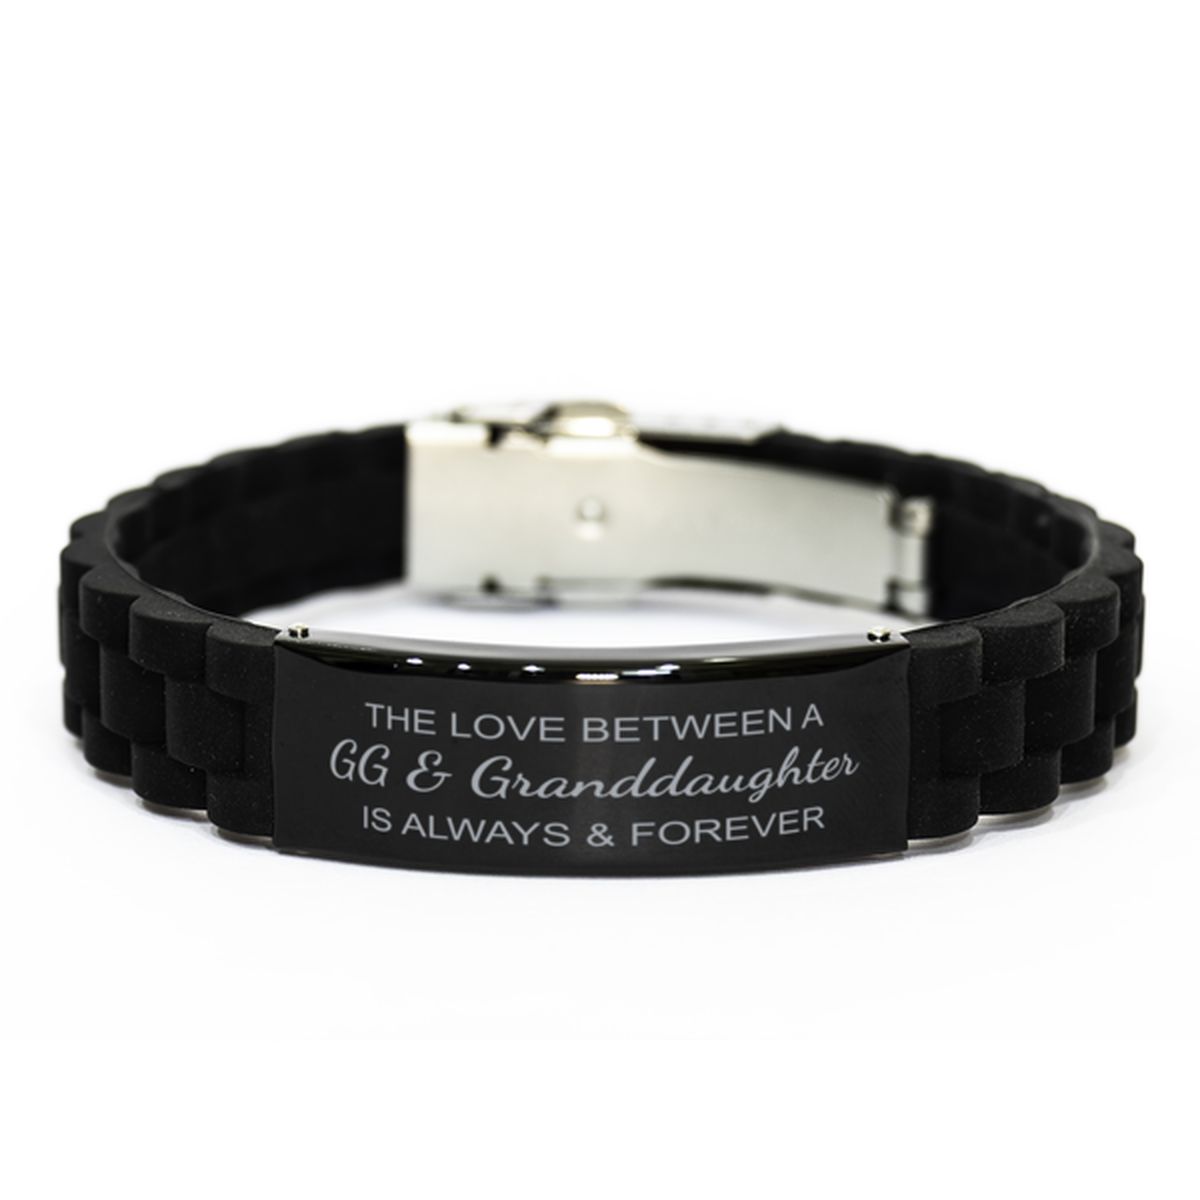 The Love Between a GG and Granddaughter is Always and Forever Bracelet, GG Granddaughter Bracelet, Black Stainless Steel Silicone Bracelet, Christmas.